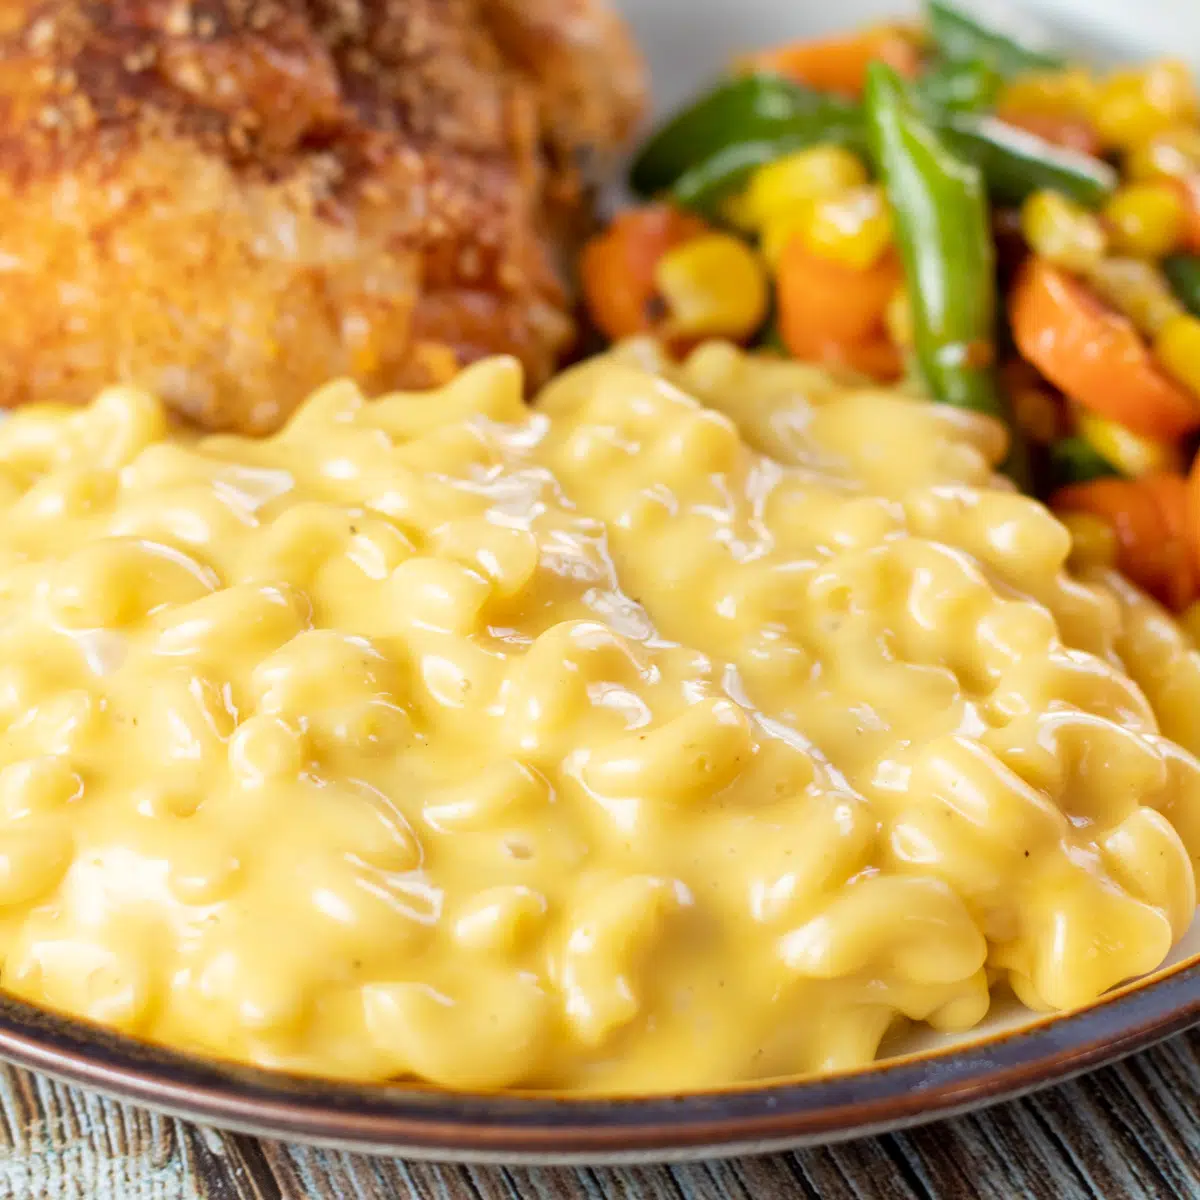 Square image showing velveeta mac & cheese on a plate with chicken and veggies.